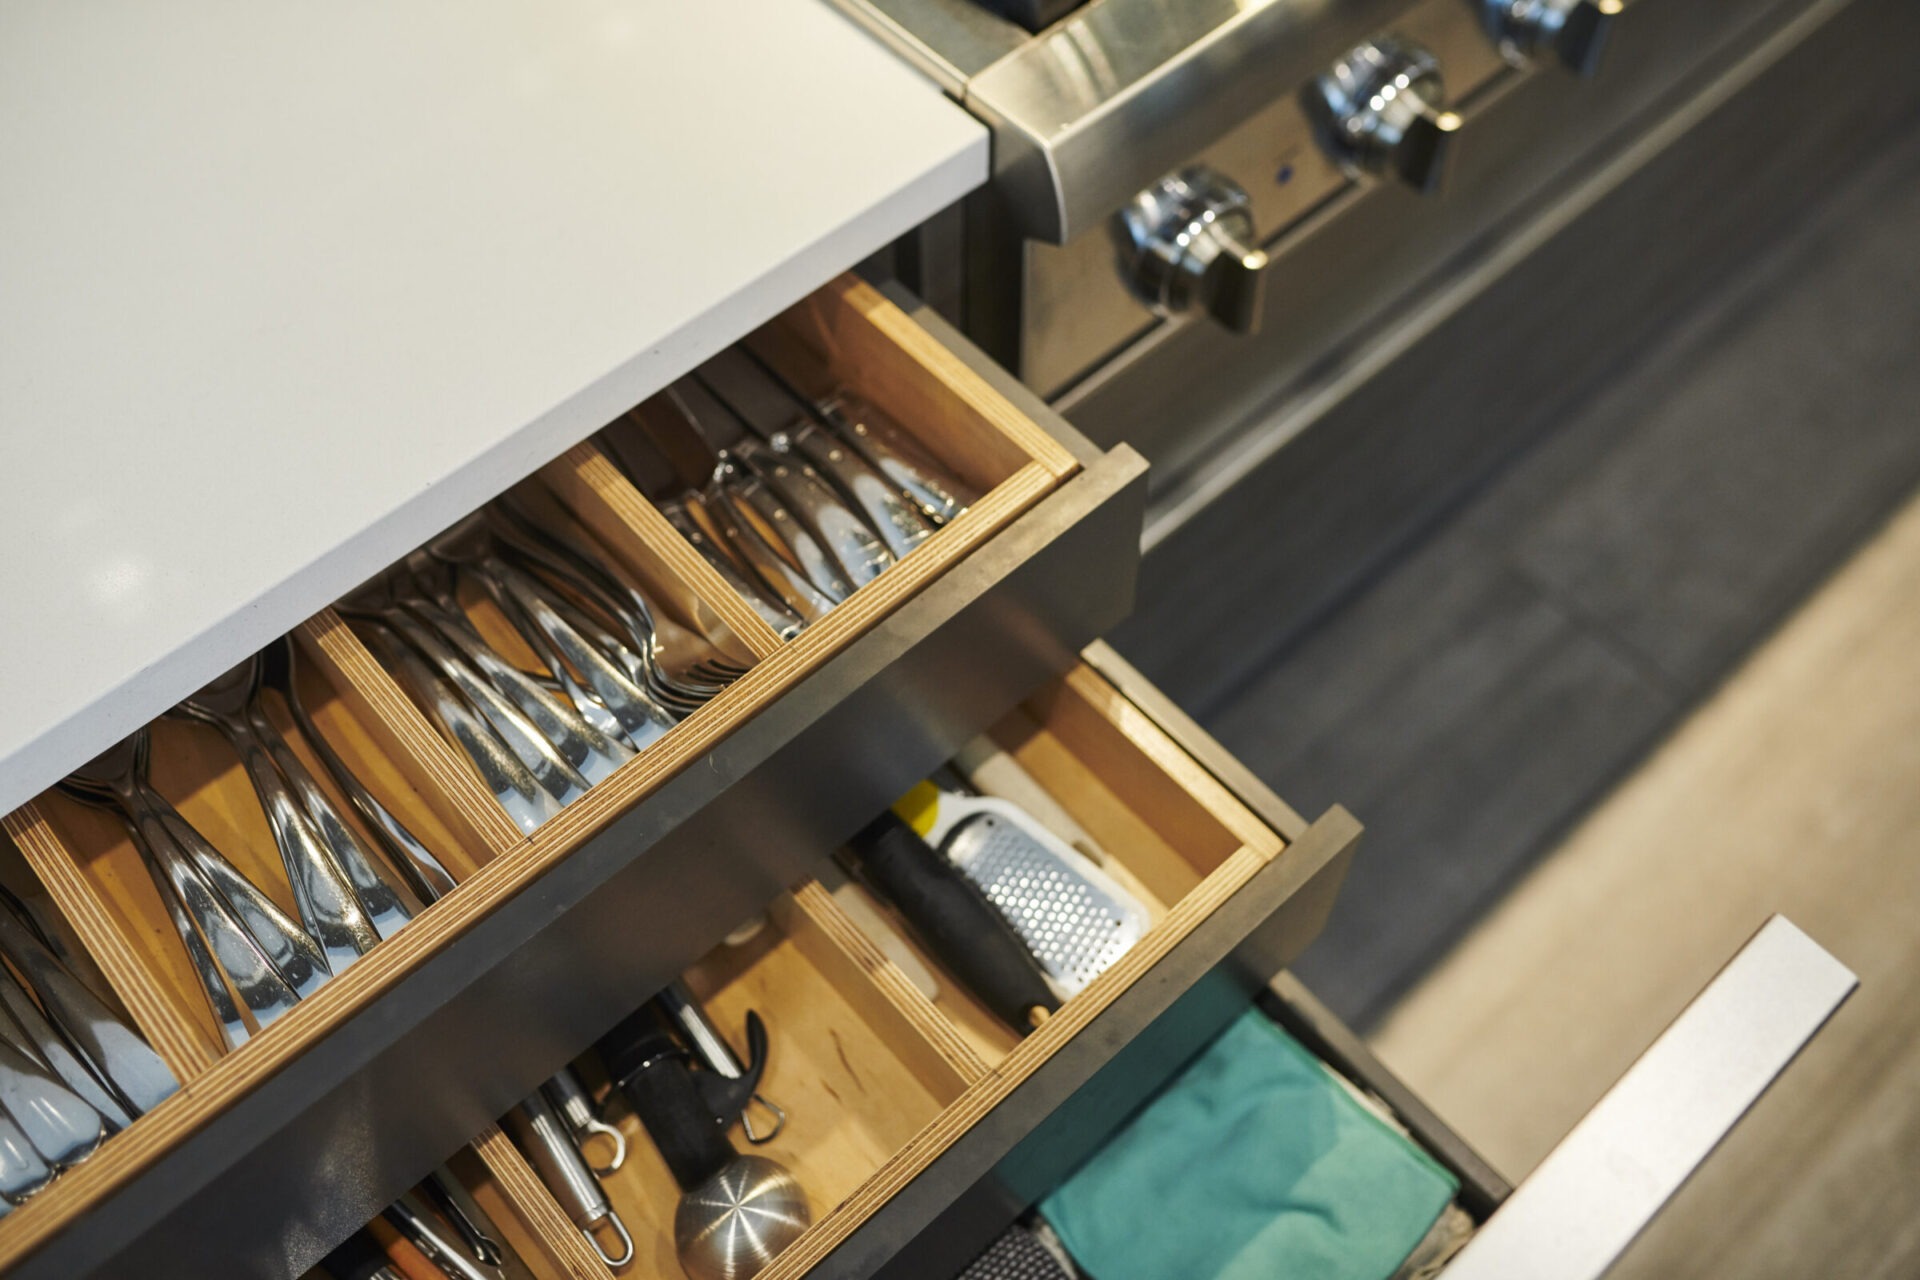 A modern kitchen drawer partially open, revealing organized utensils like forks and knives, next to a stainless steel oven with knobs.